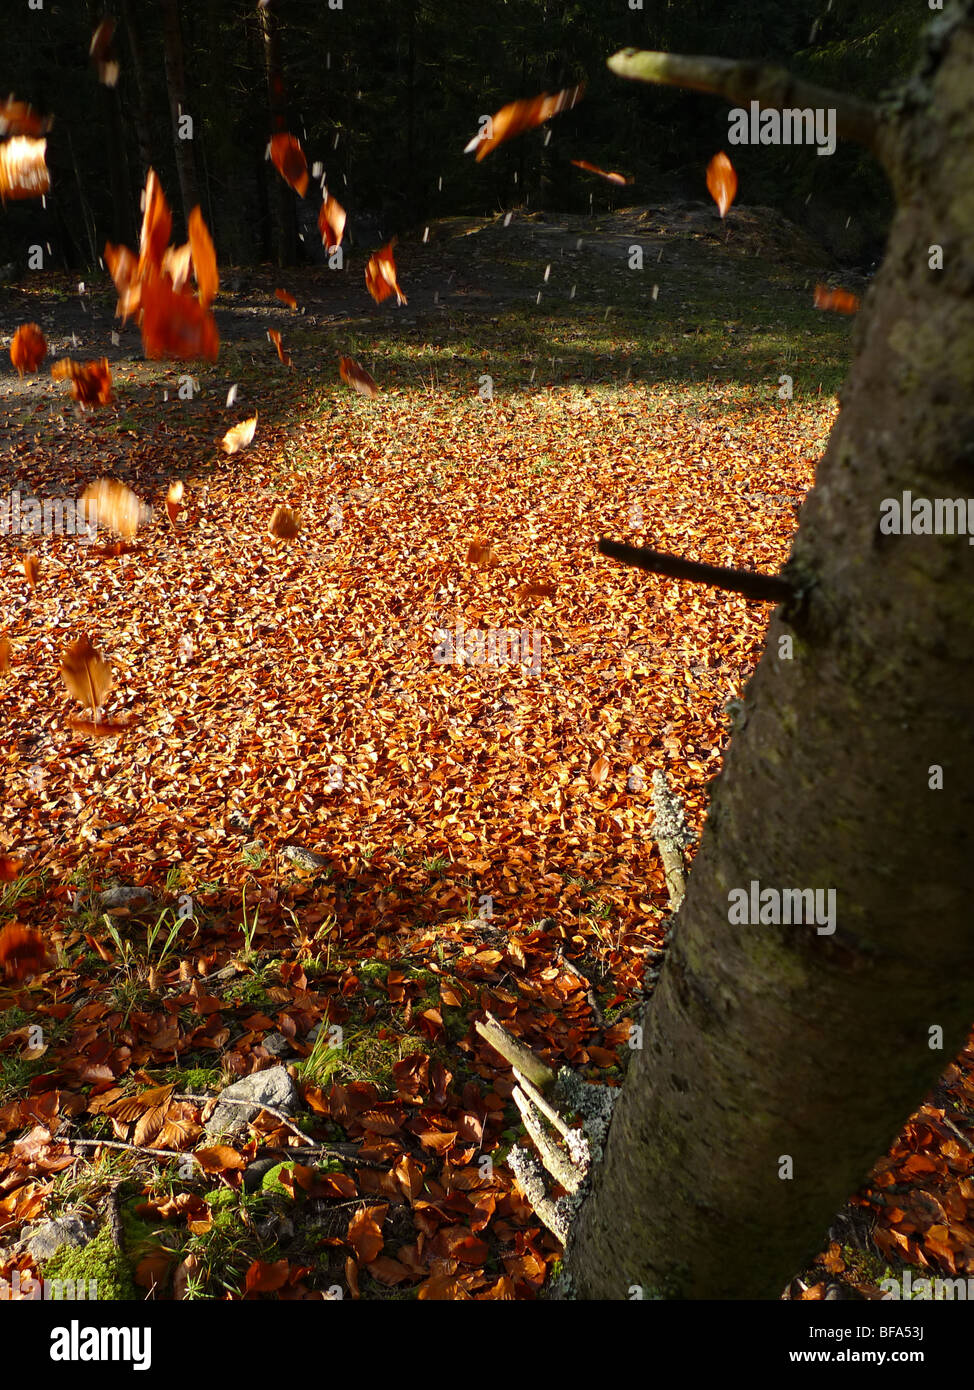 Autumn leaves falling from a tree Stock Photo